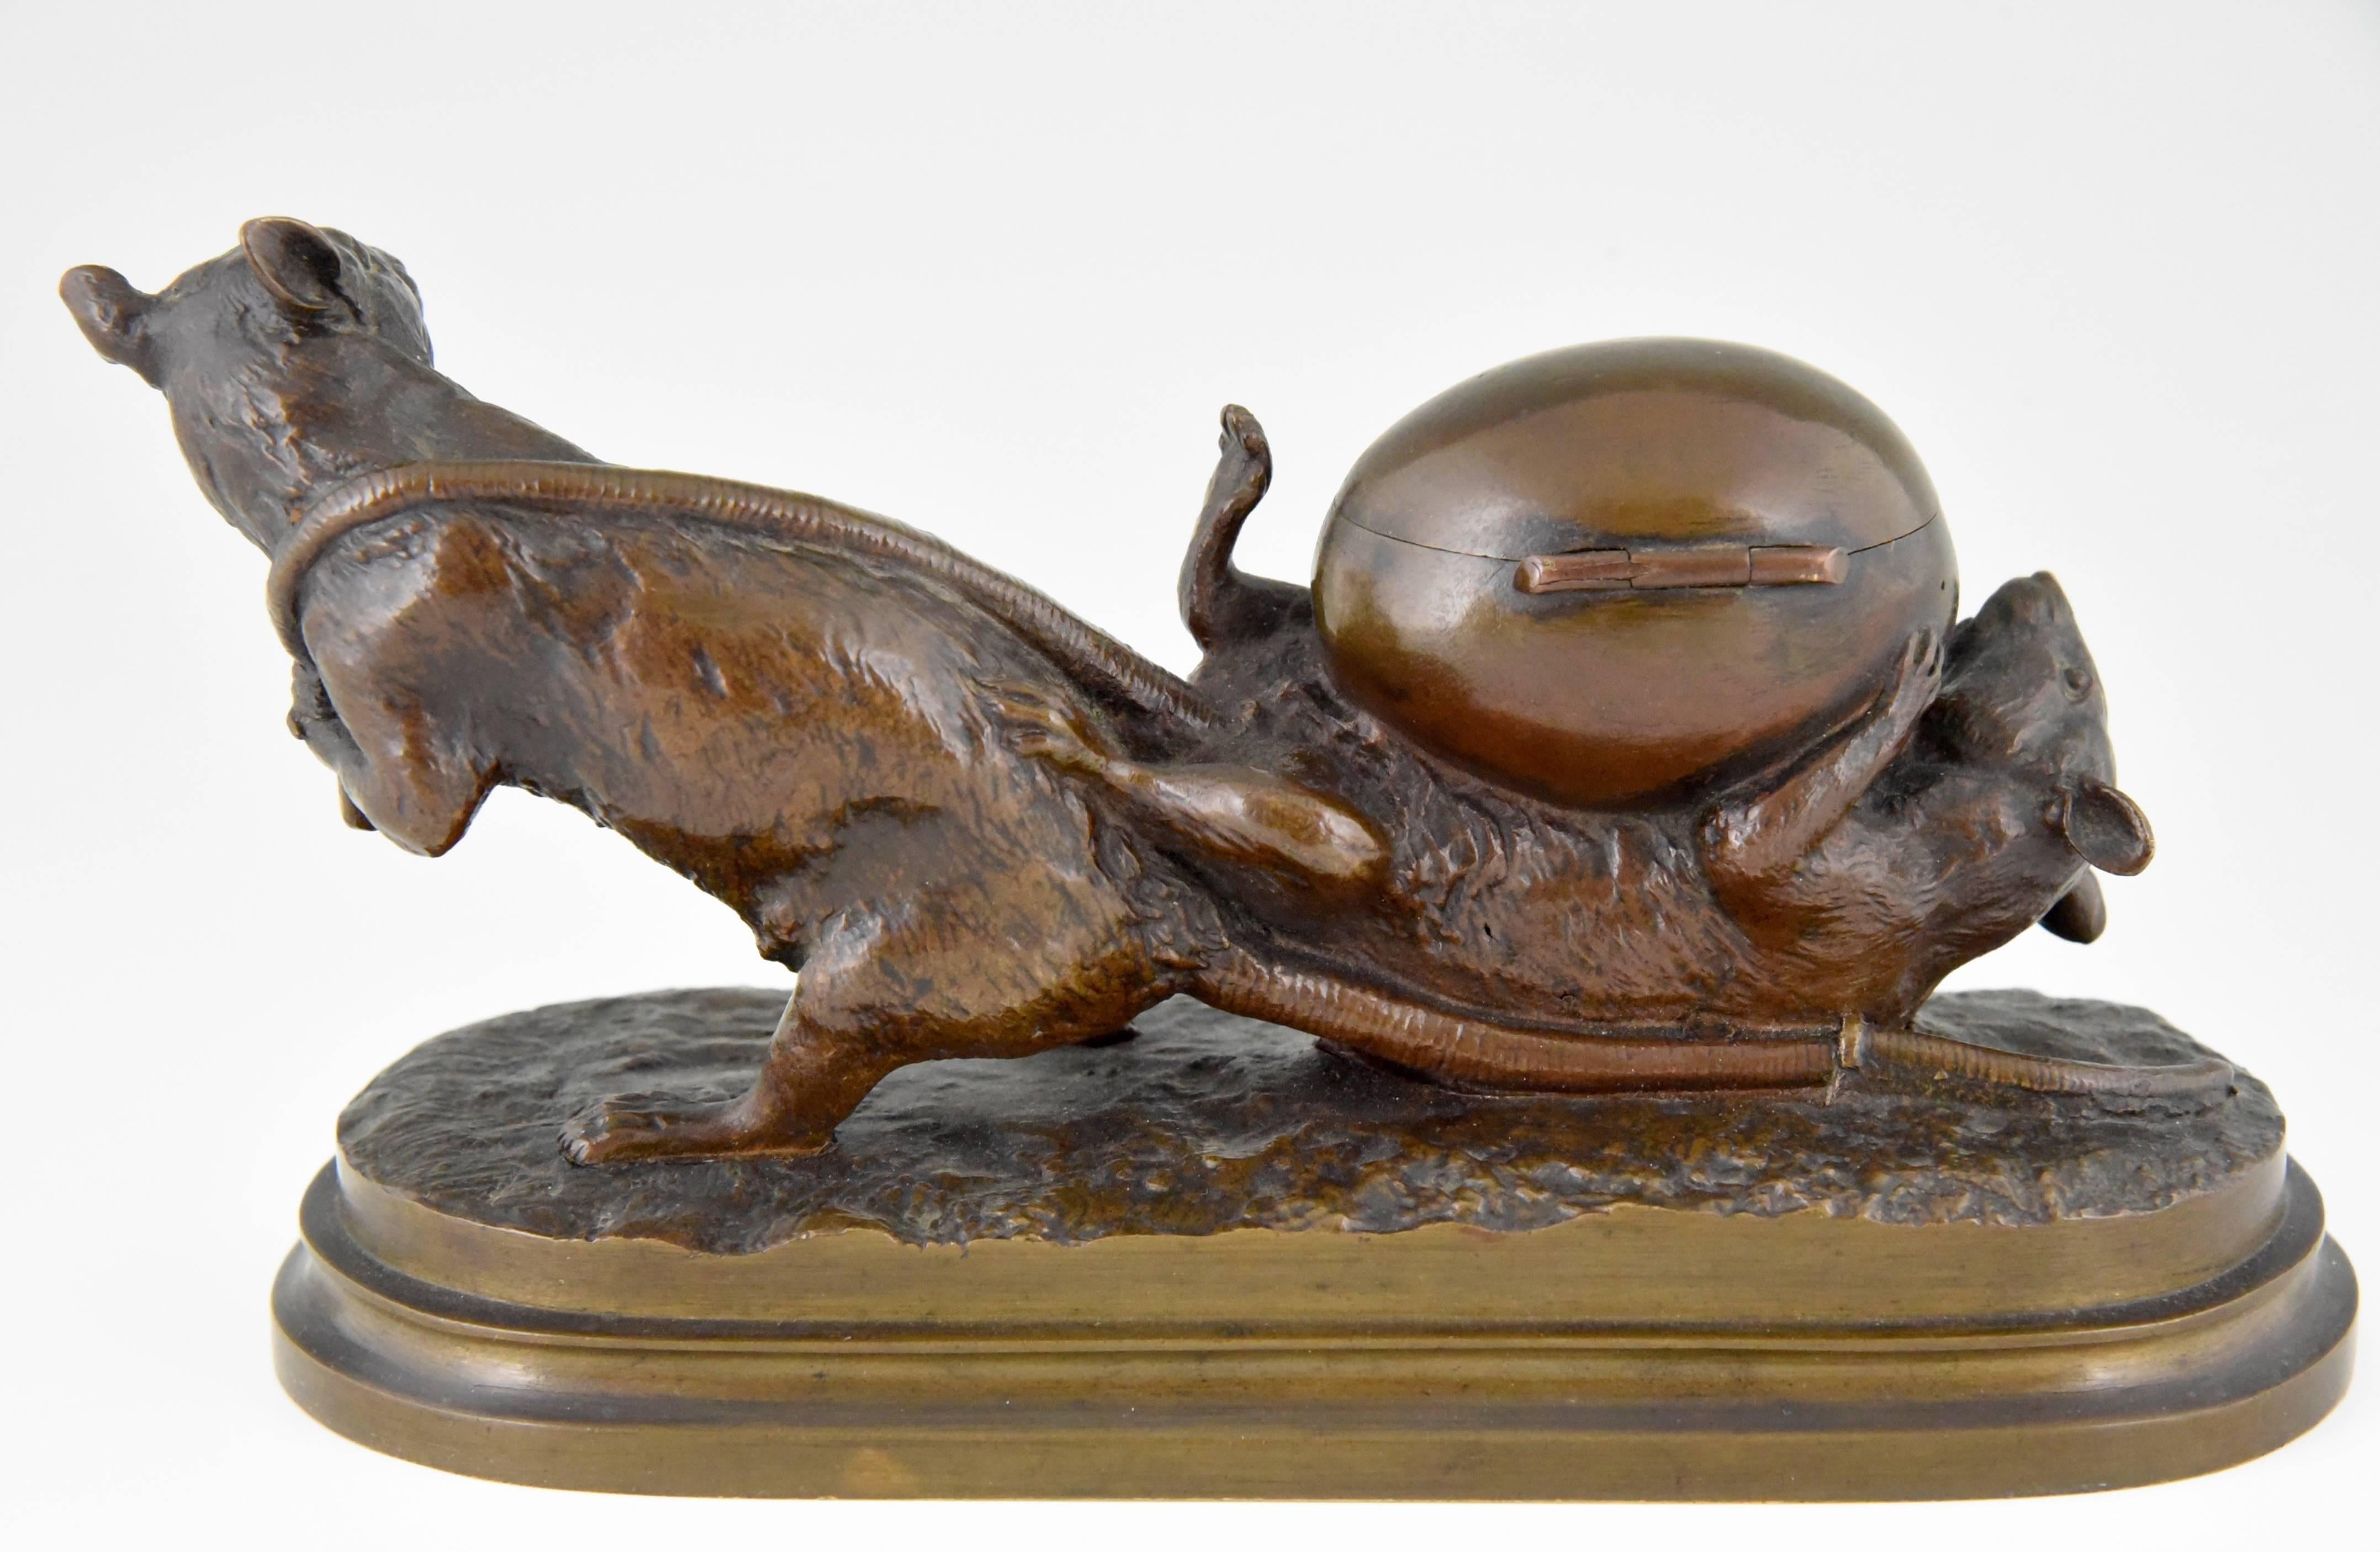 Romantic French Antique bronze sculpture of two mice & egg by Isidore Bonheur 1880